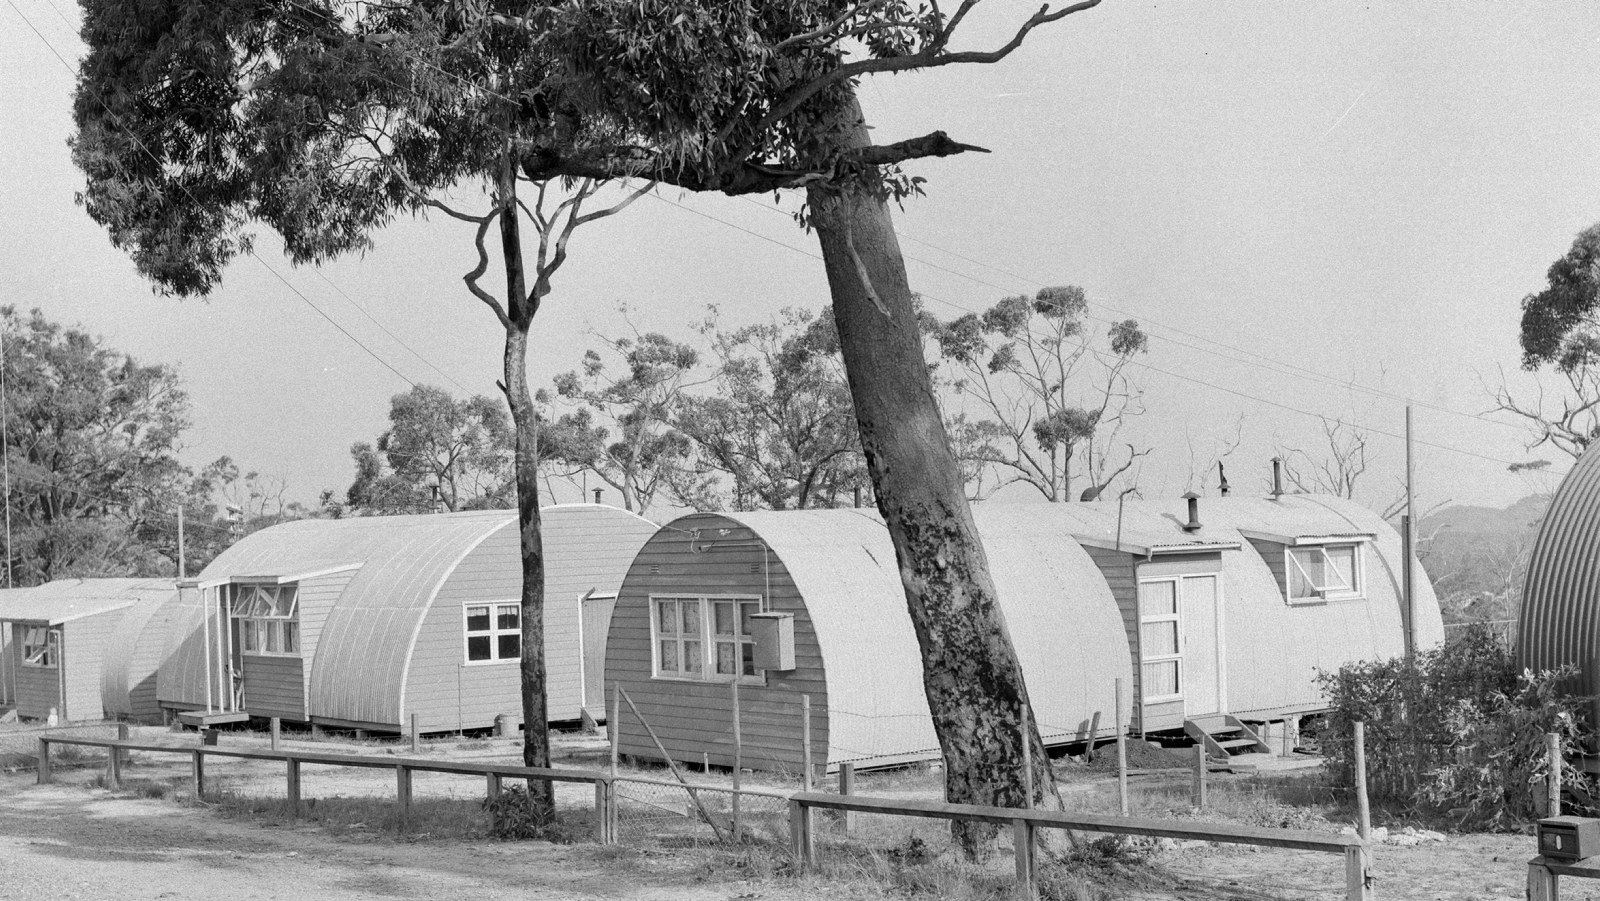 Nissen huts at Belmont, Government Printing Office, 1957.